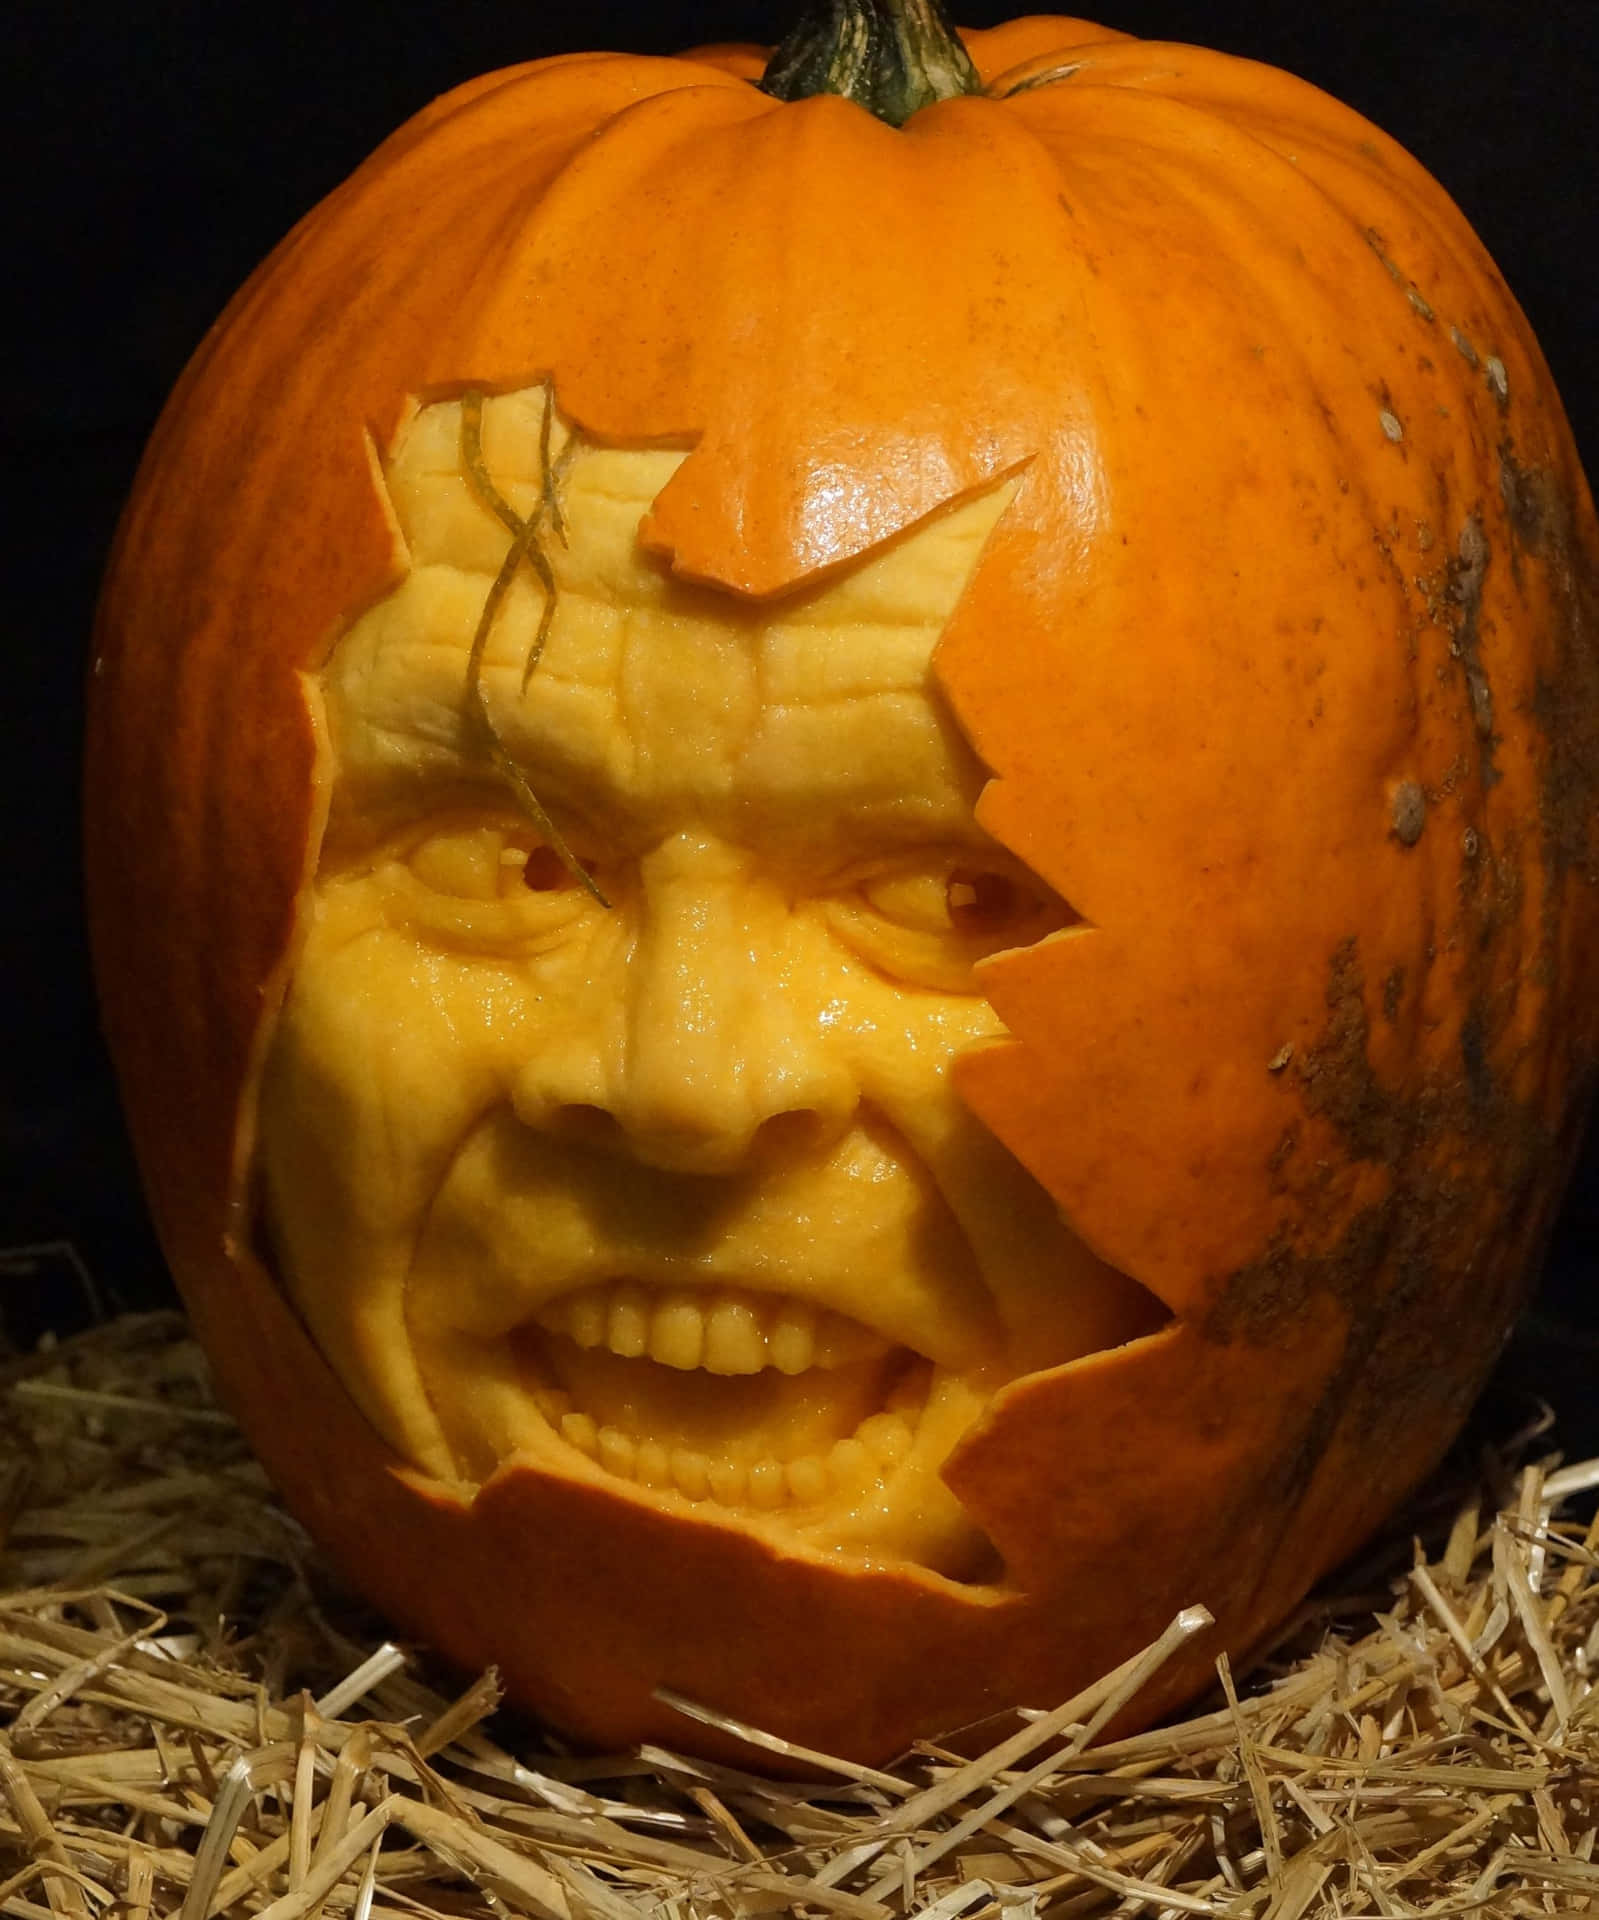 Download A Pumpkin With A Face Carved Into It | Wallpapers.com